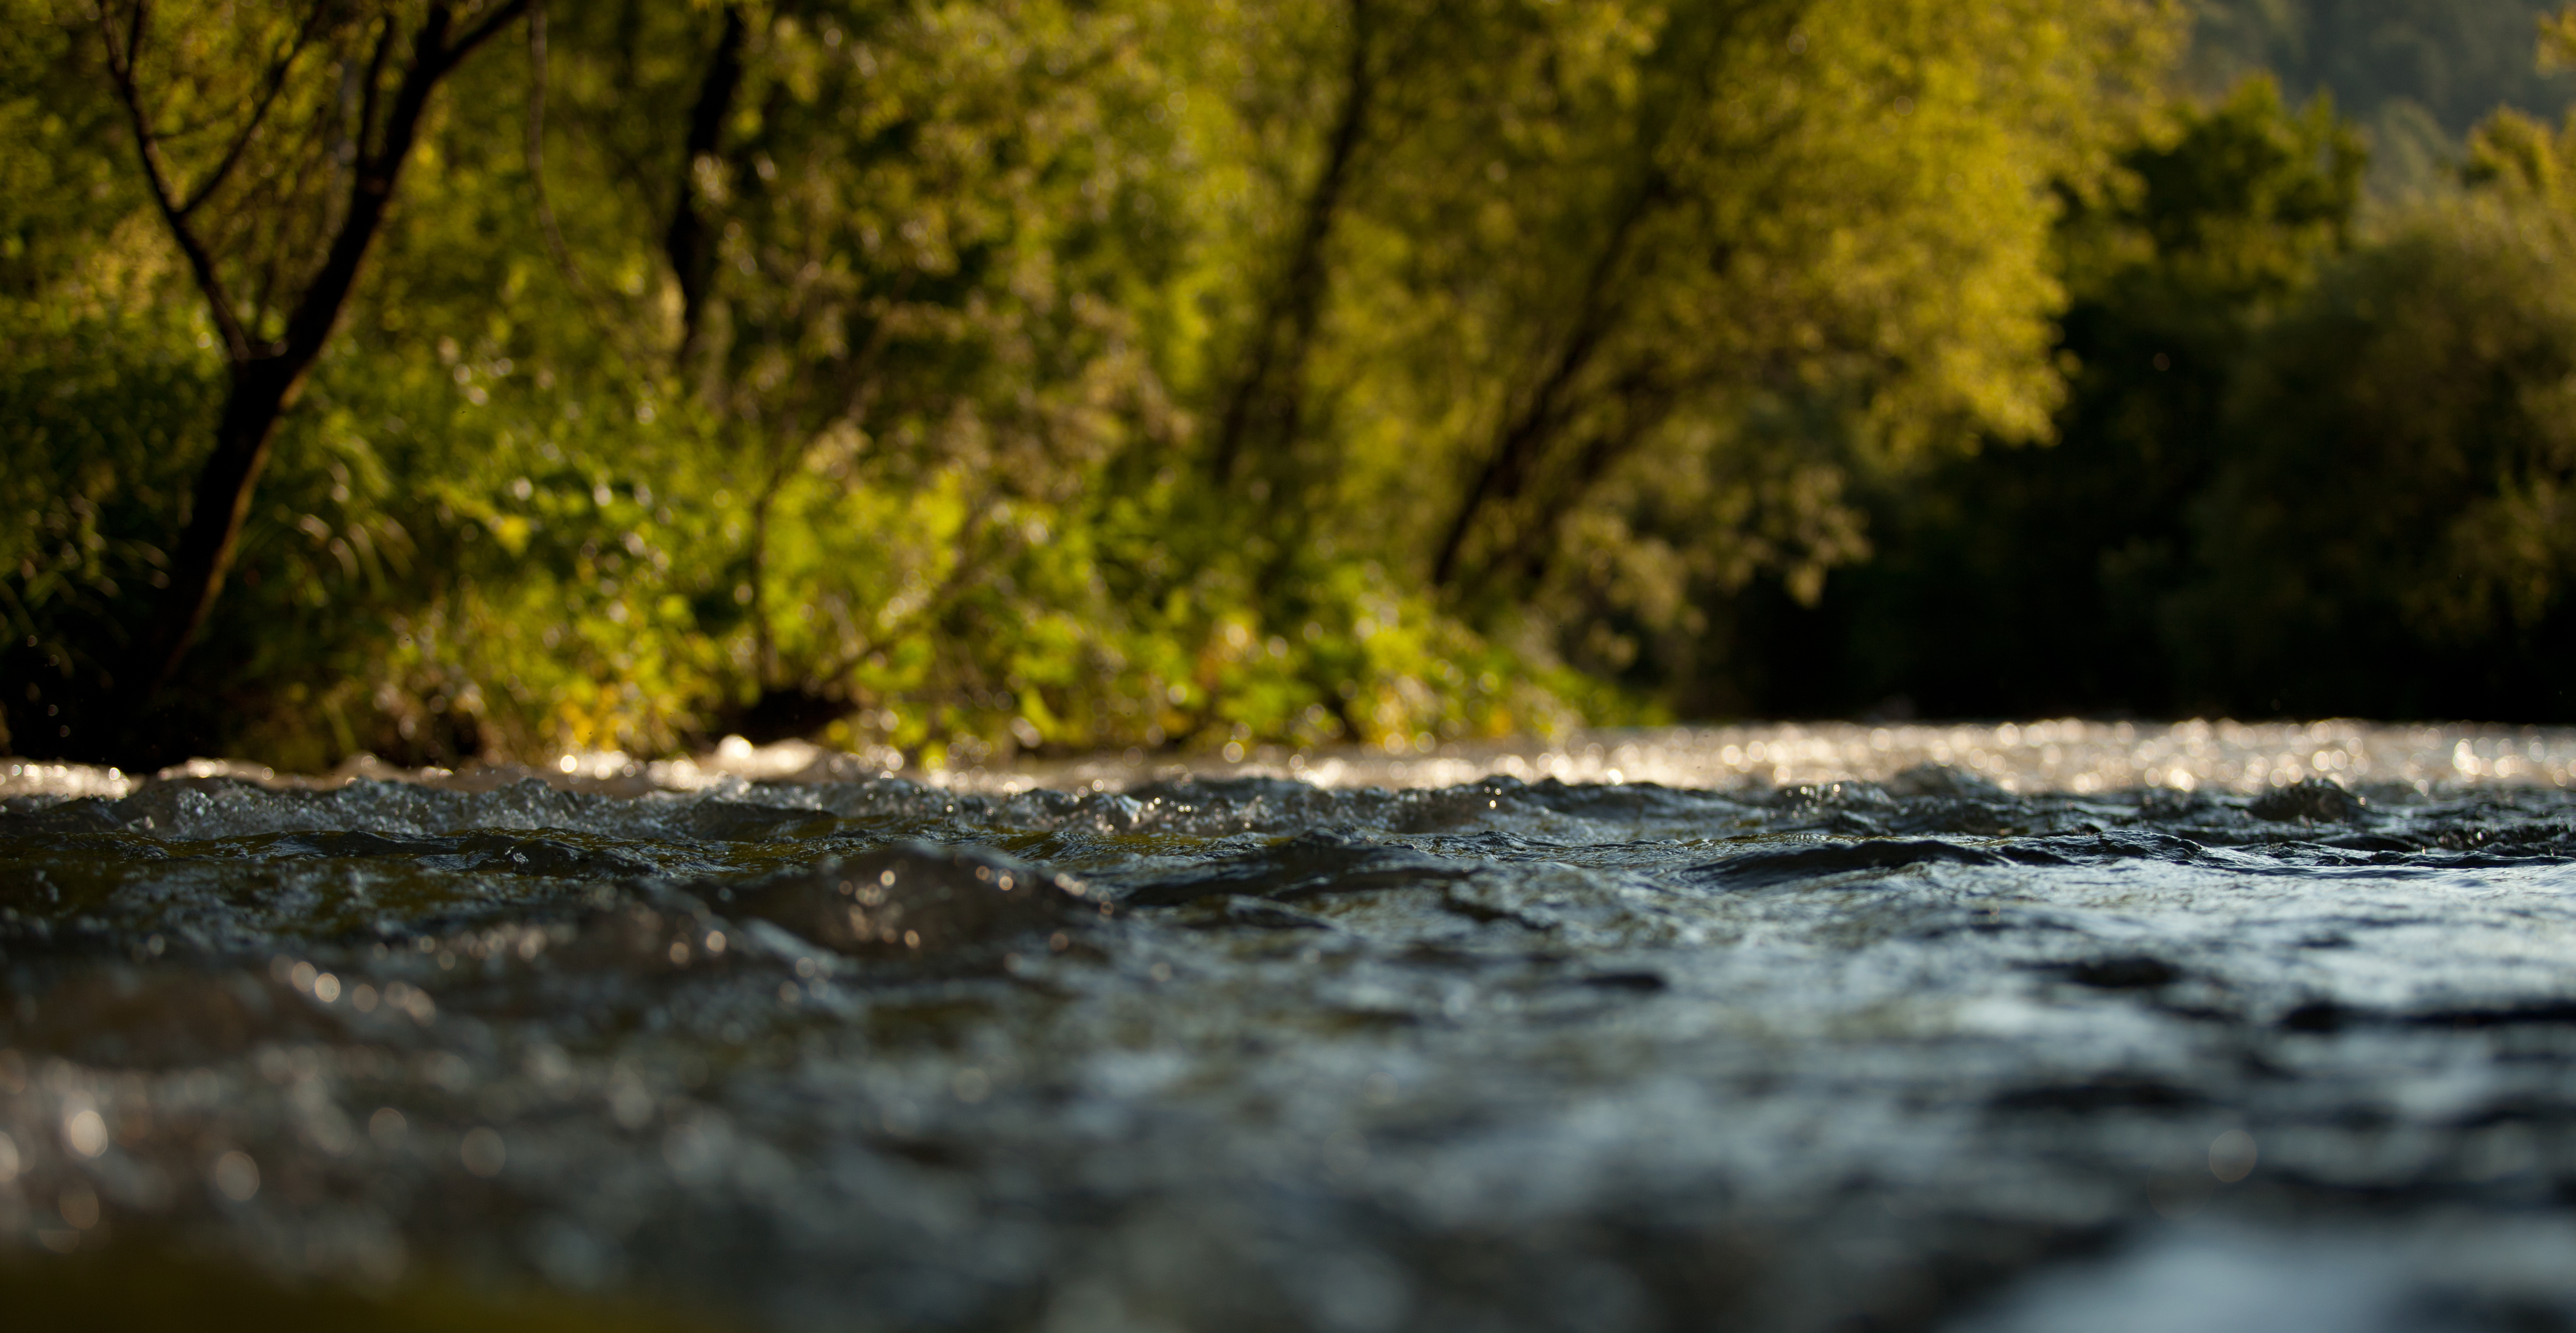 Stream, image from the surface of the water. Photo credit: Olesya Mishkina / Shutterstock